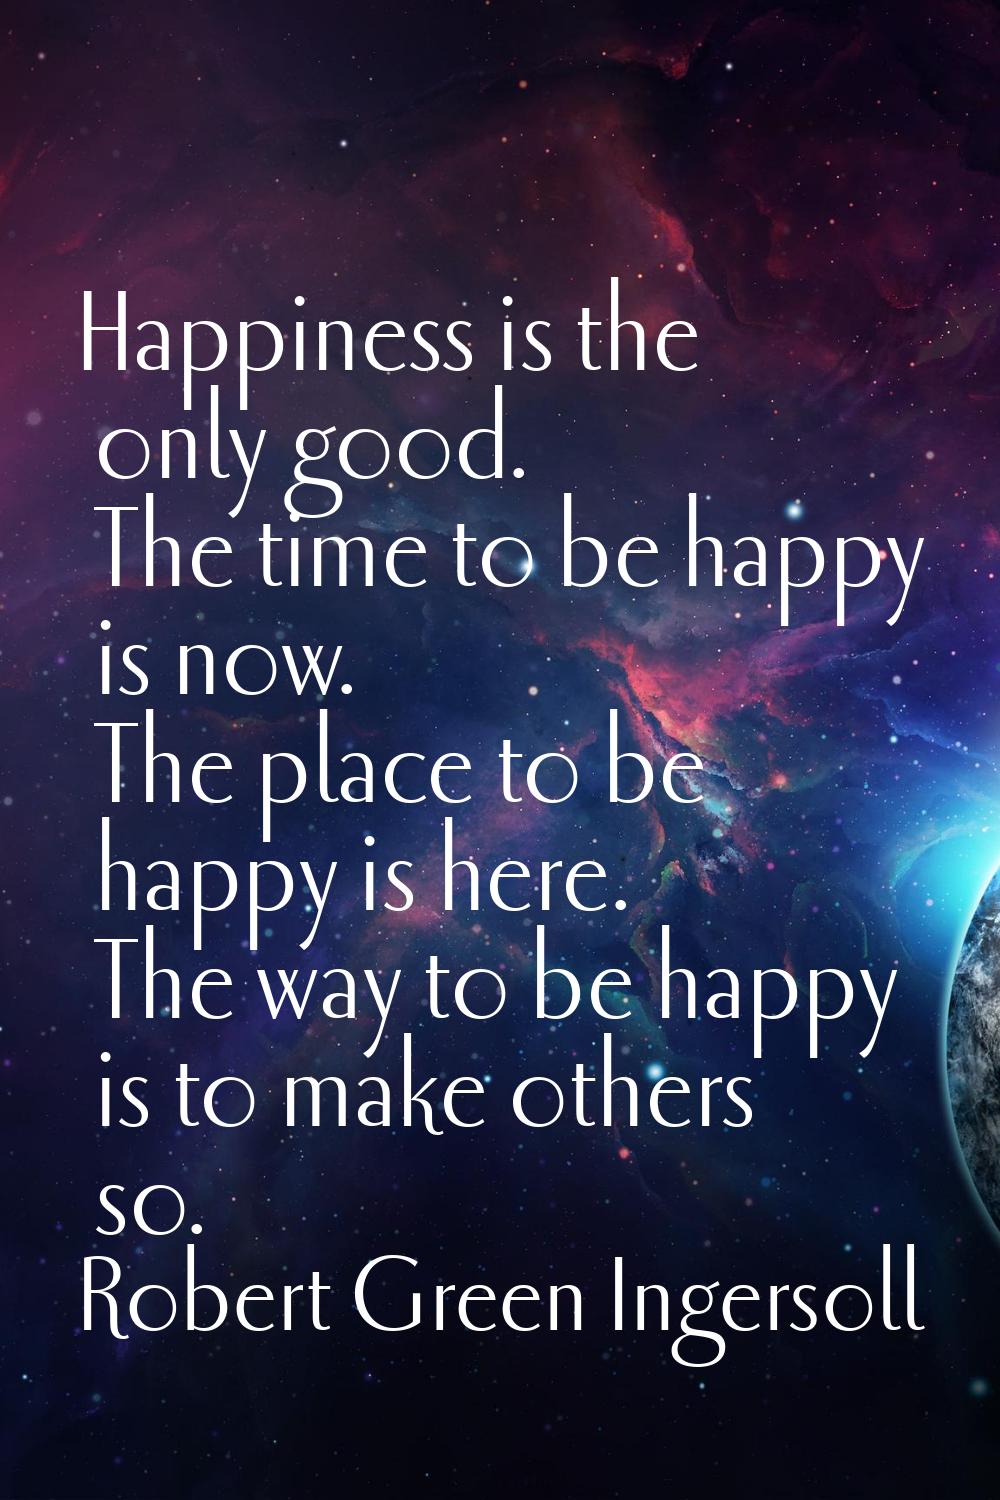 Happiness is the only good. The time to be happy is now. The place to be happy is here. The way to 